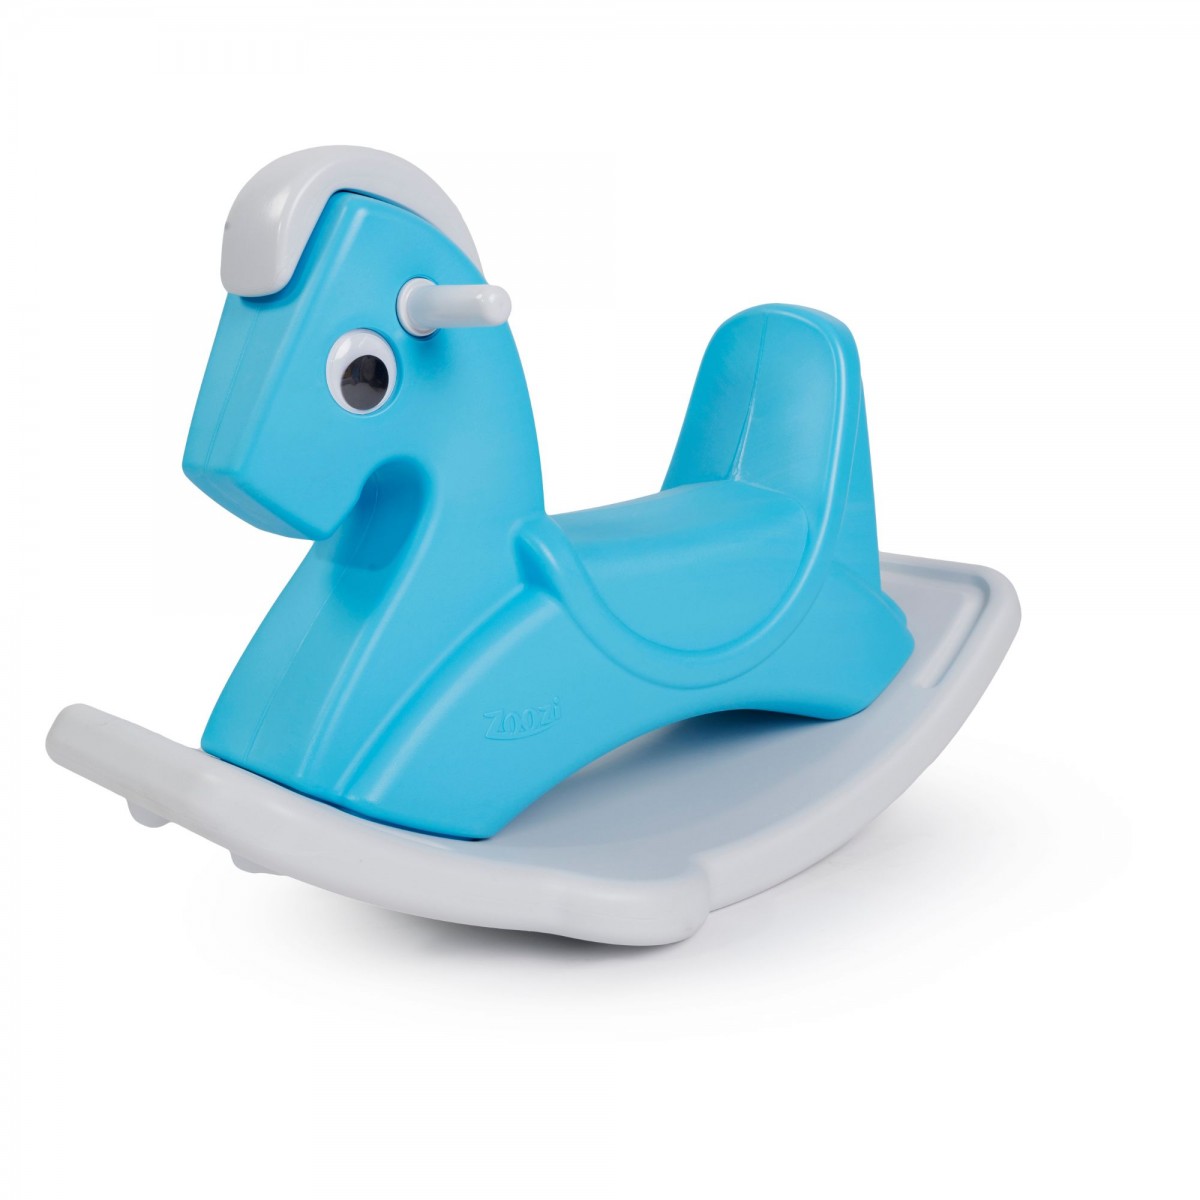 Zoozi  2 in 1 Ride On Rocking Horse for Toddlers and Babies, Comes with Wheels, Blue, 12M+